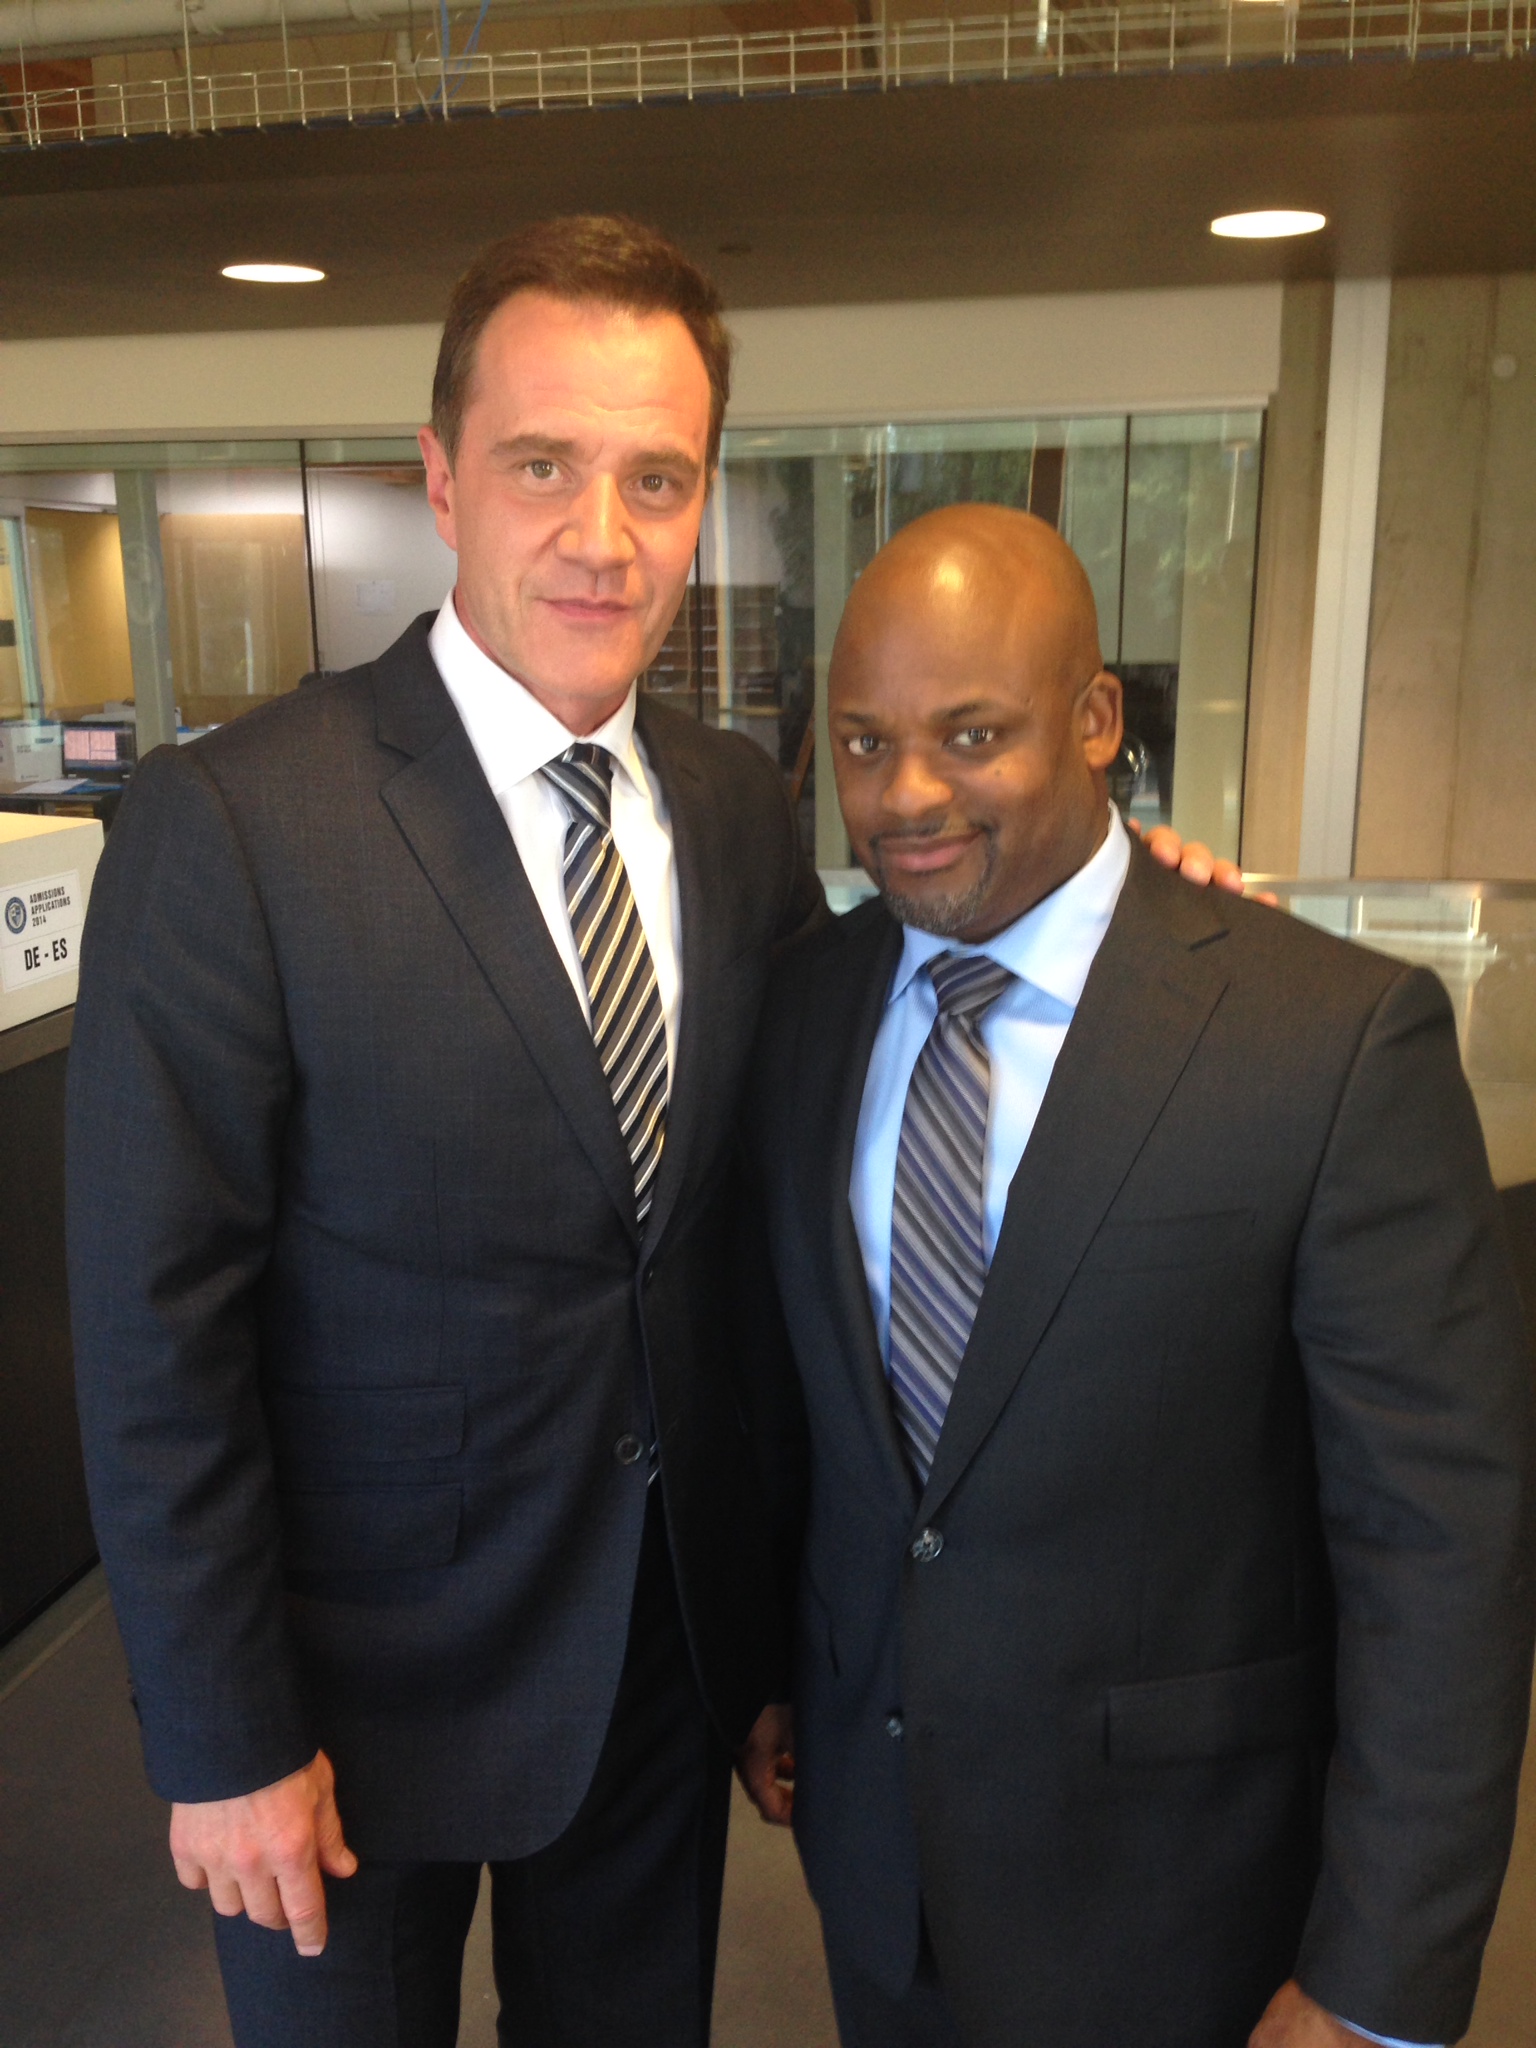 Doron Bell and Tim DeKay on the set of Second Chance.